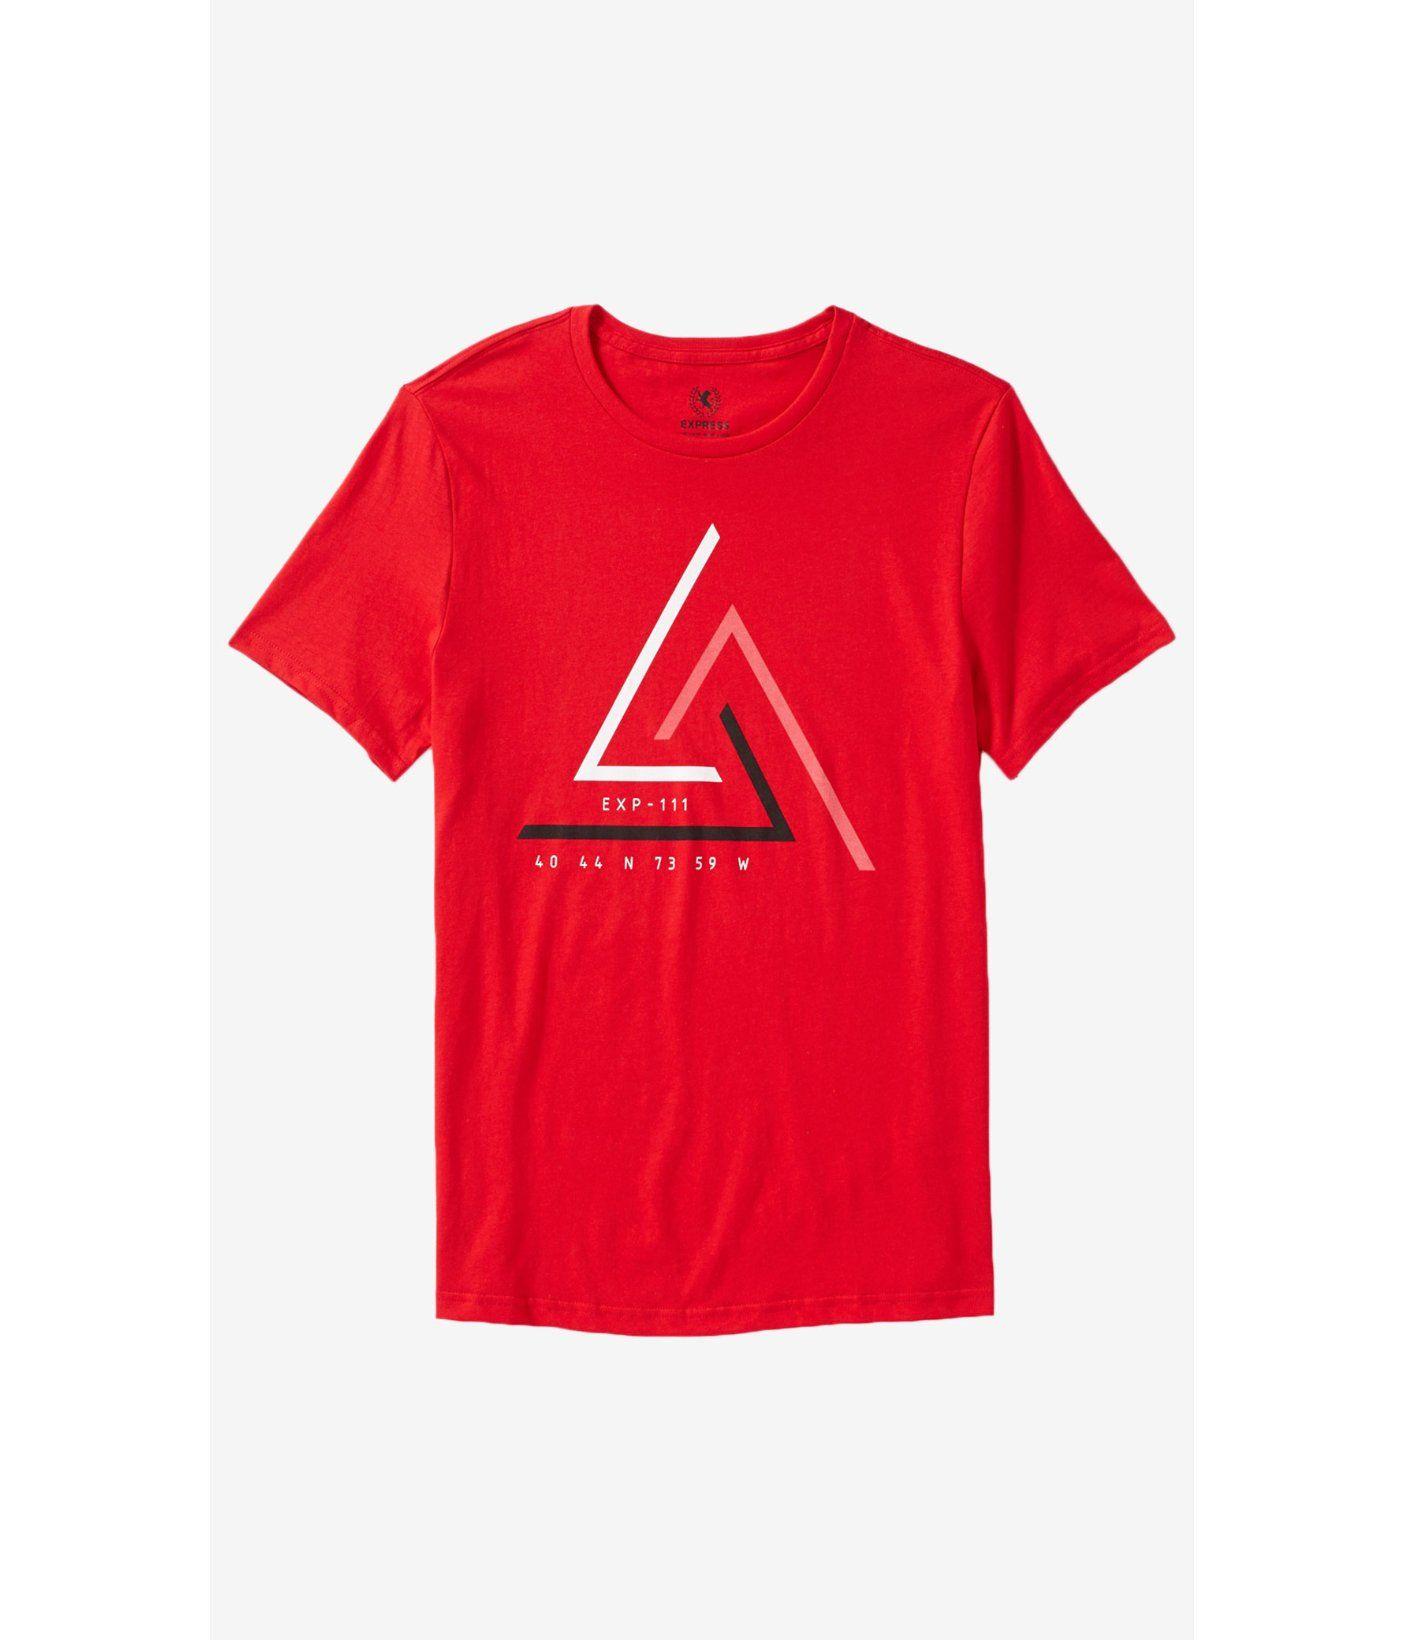 Red Triangle Clothing Logo - Express Triangle Bars Graphic Tee in Red for Men